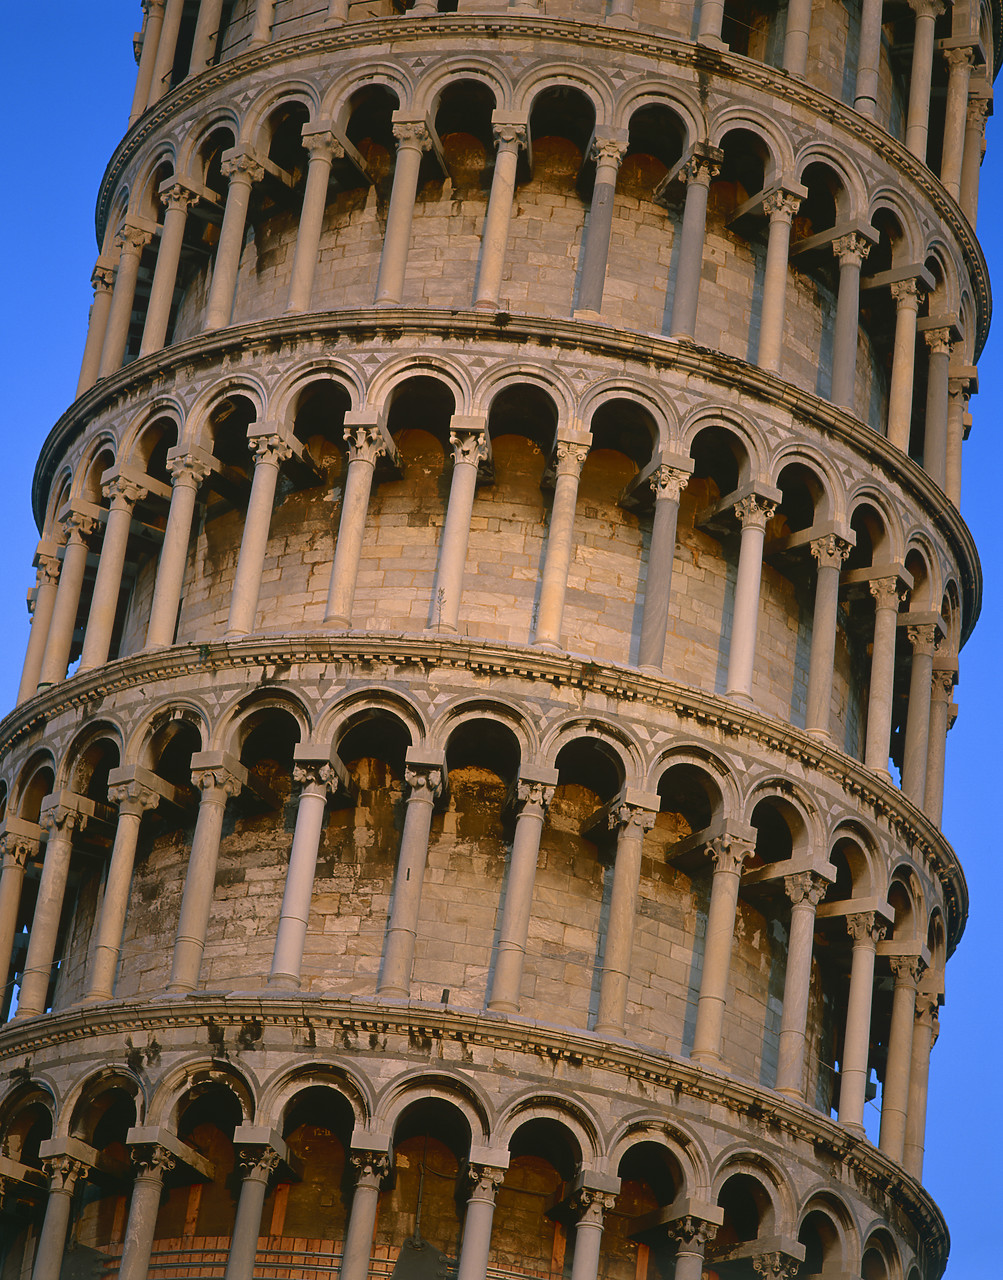 #200563-1 - The Leaning Tower of Pisa, Italy